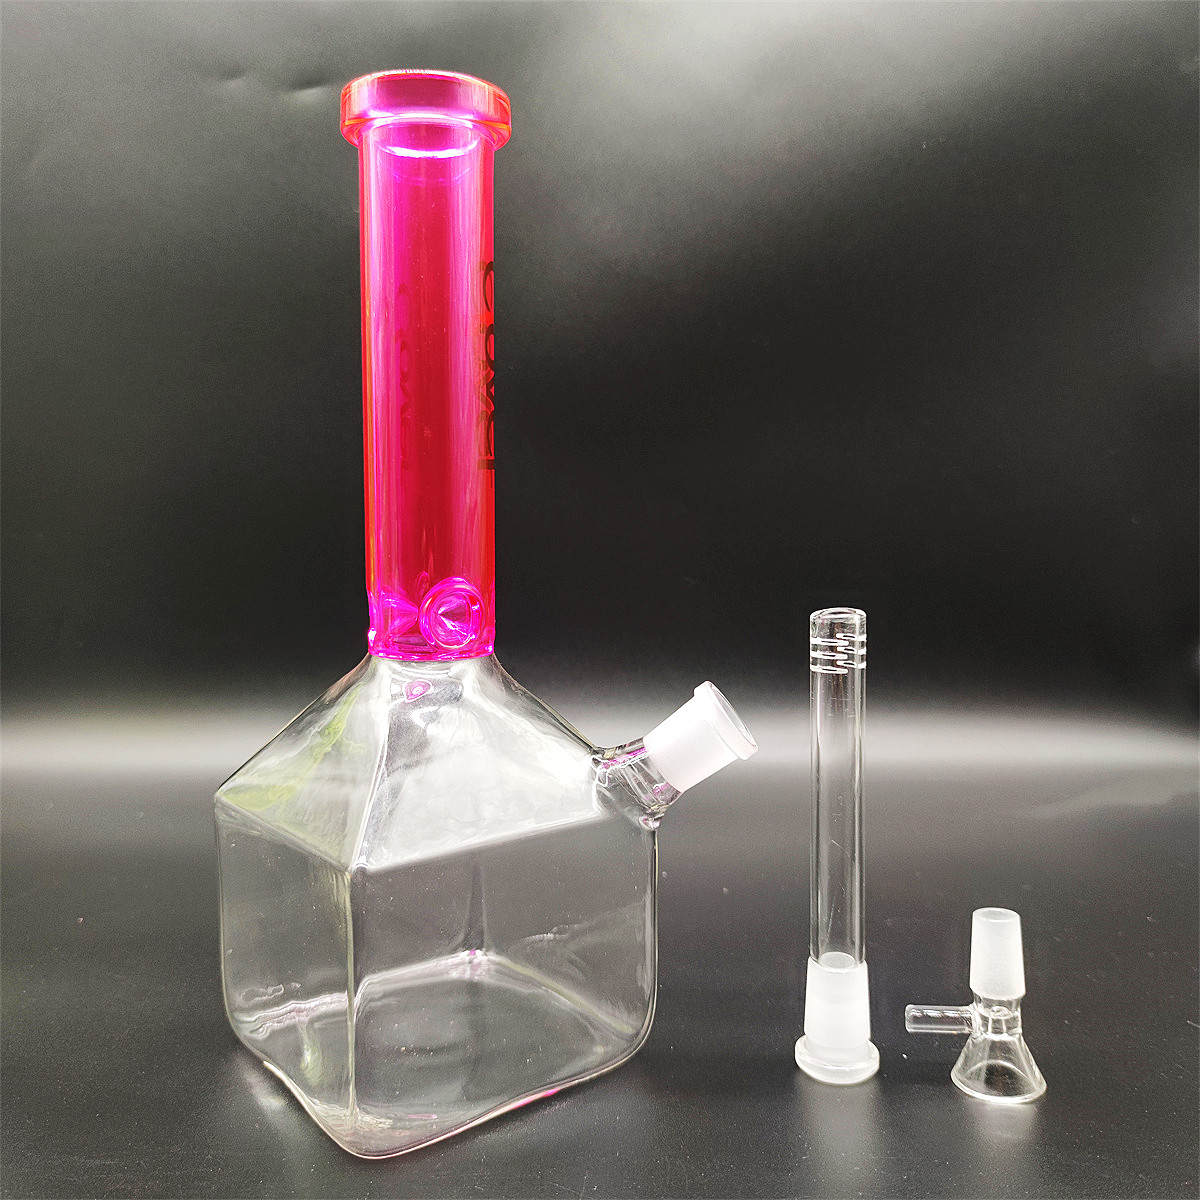 2023 Heady Bong Hookah Bong Glass Dab Rig Unique Design Multi Color Blue Cube Base Freezer Water Bongs Smoke Pipes 14.4mm Male Bowl With Stem wholesale